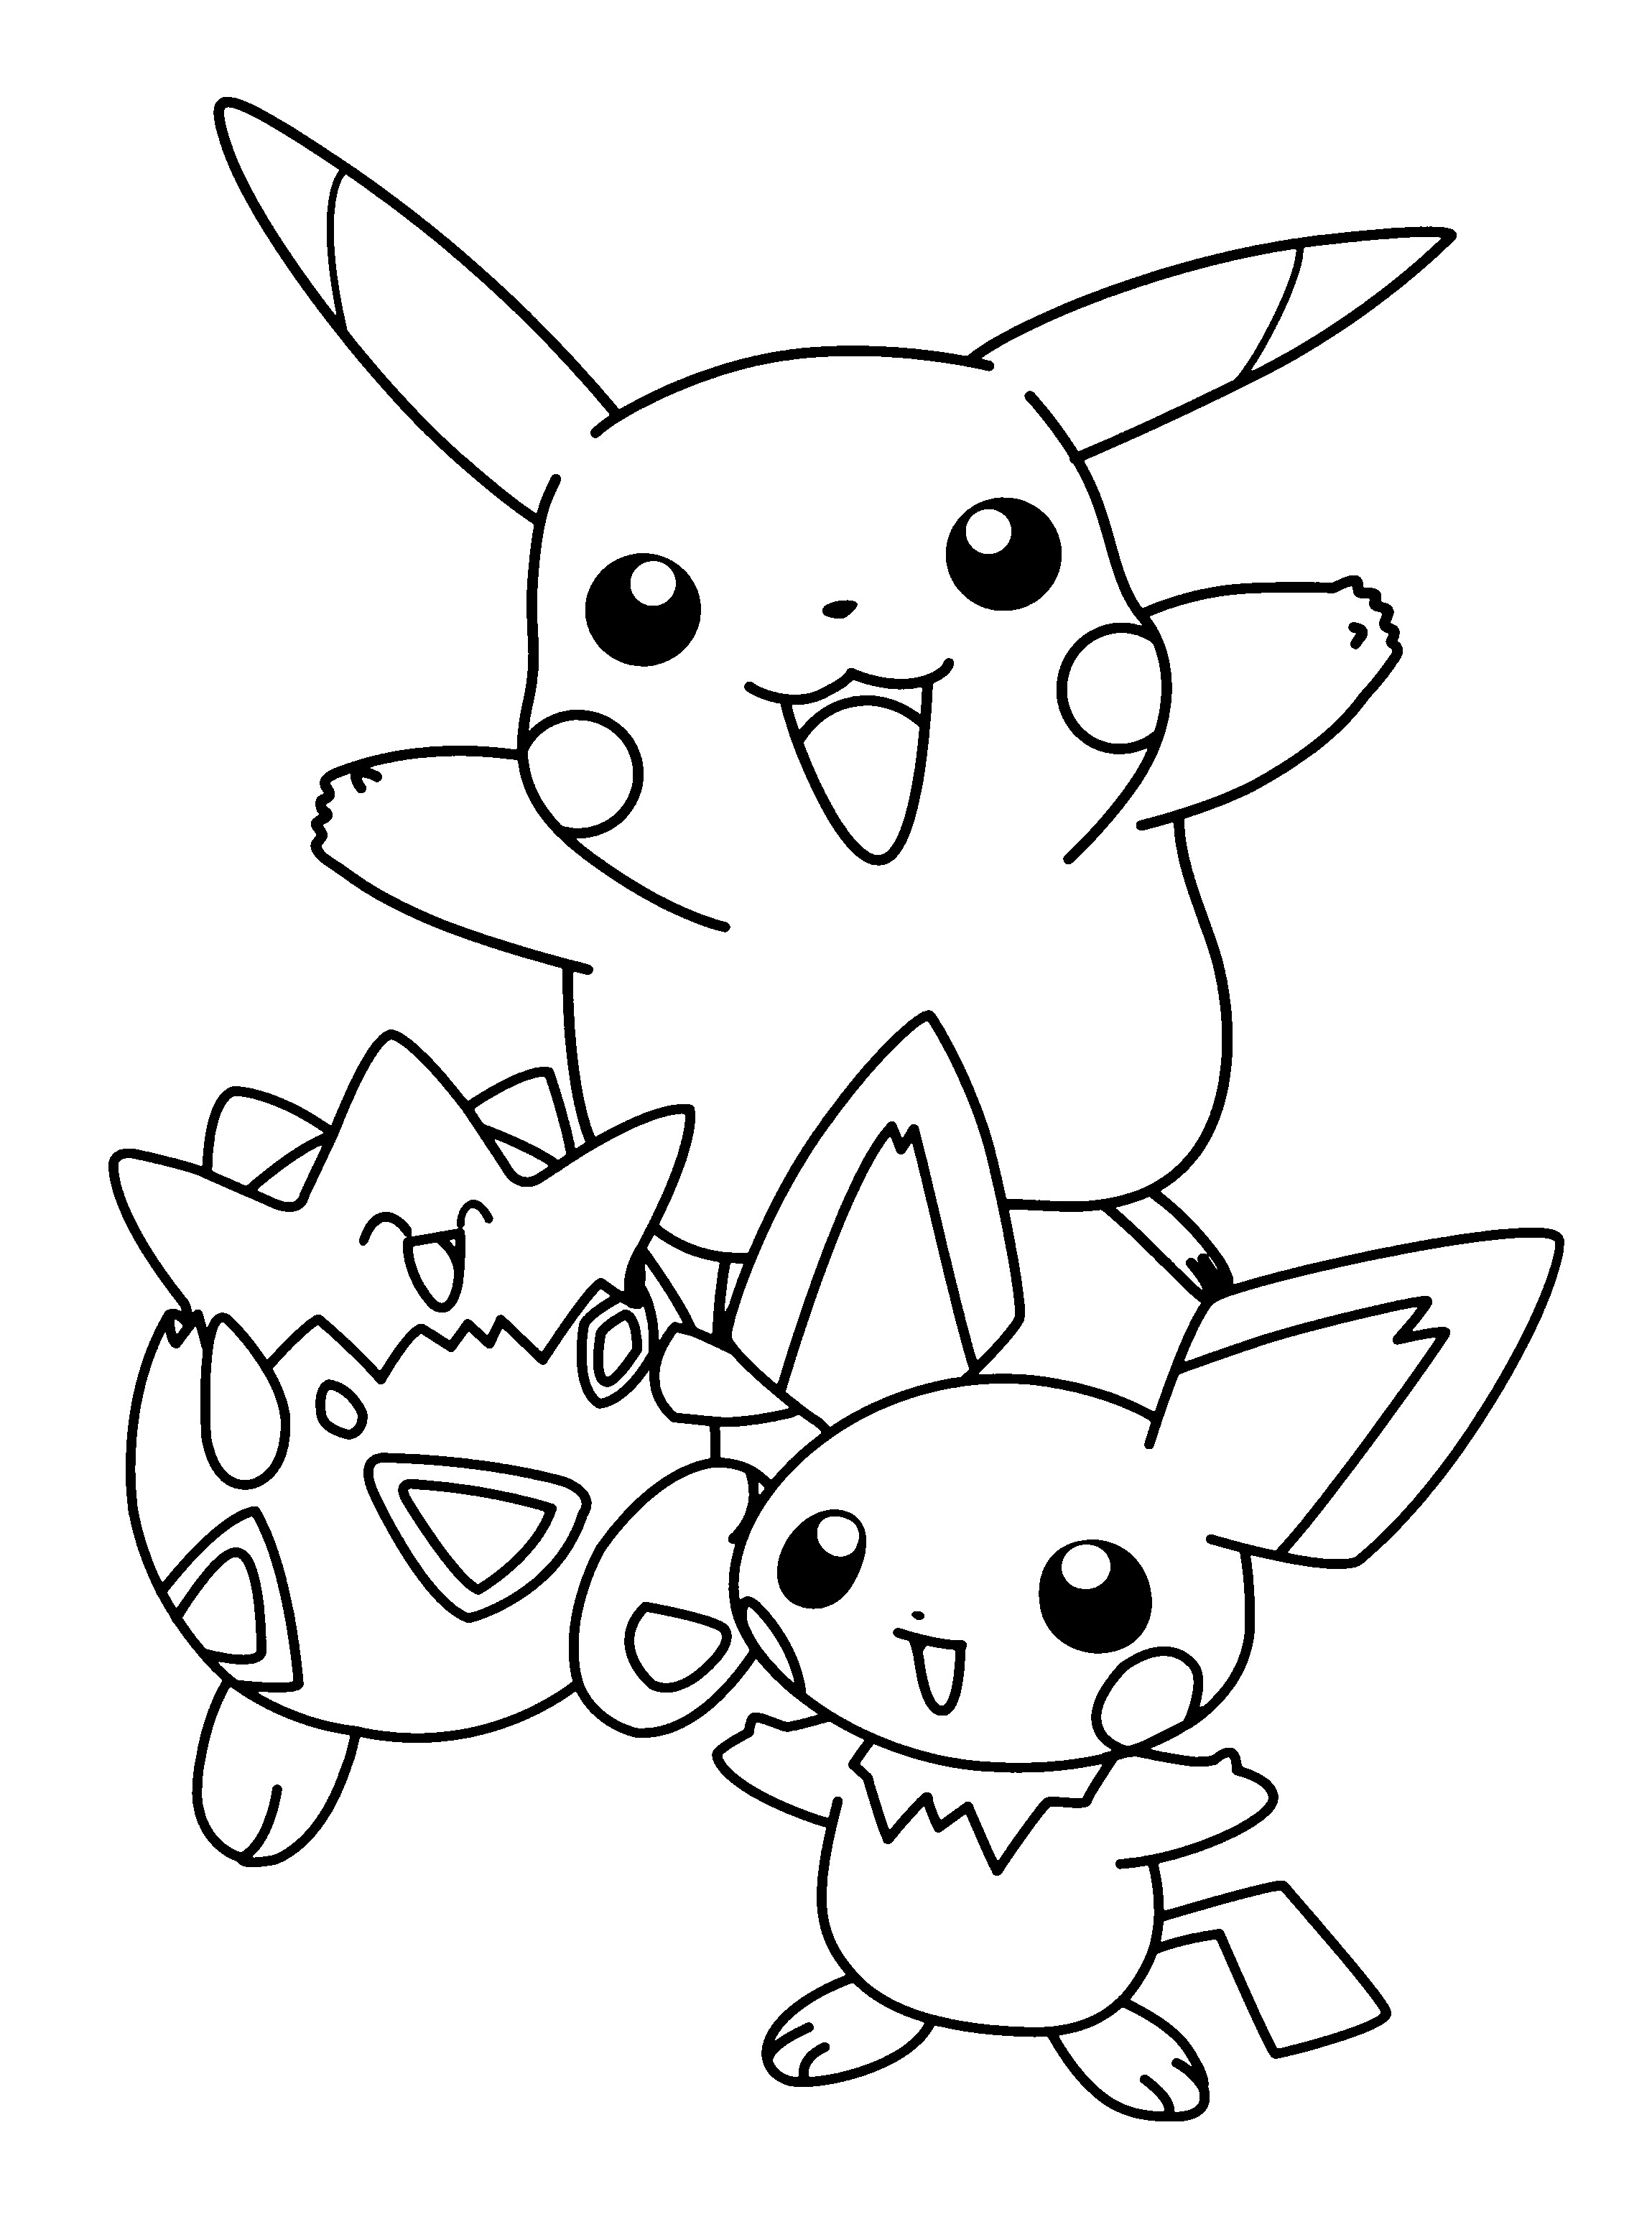 Pikachu and Charizard Coloring Pages Wallpaper